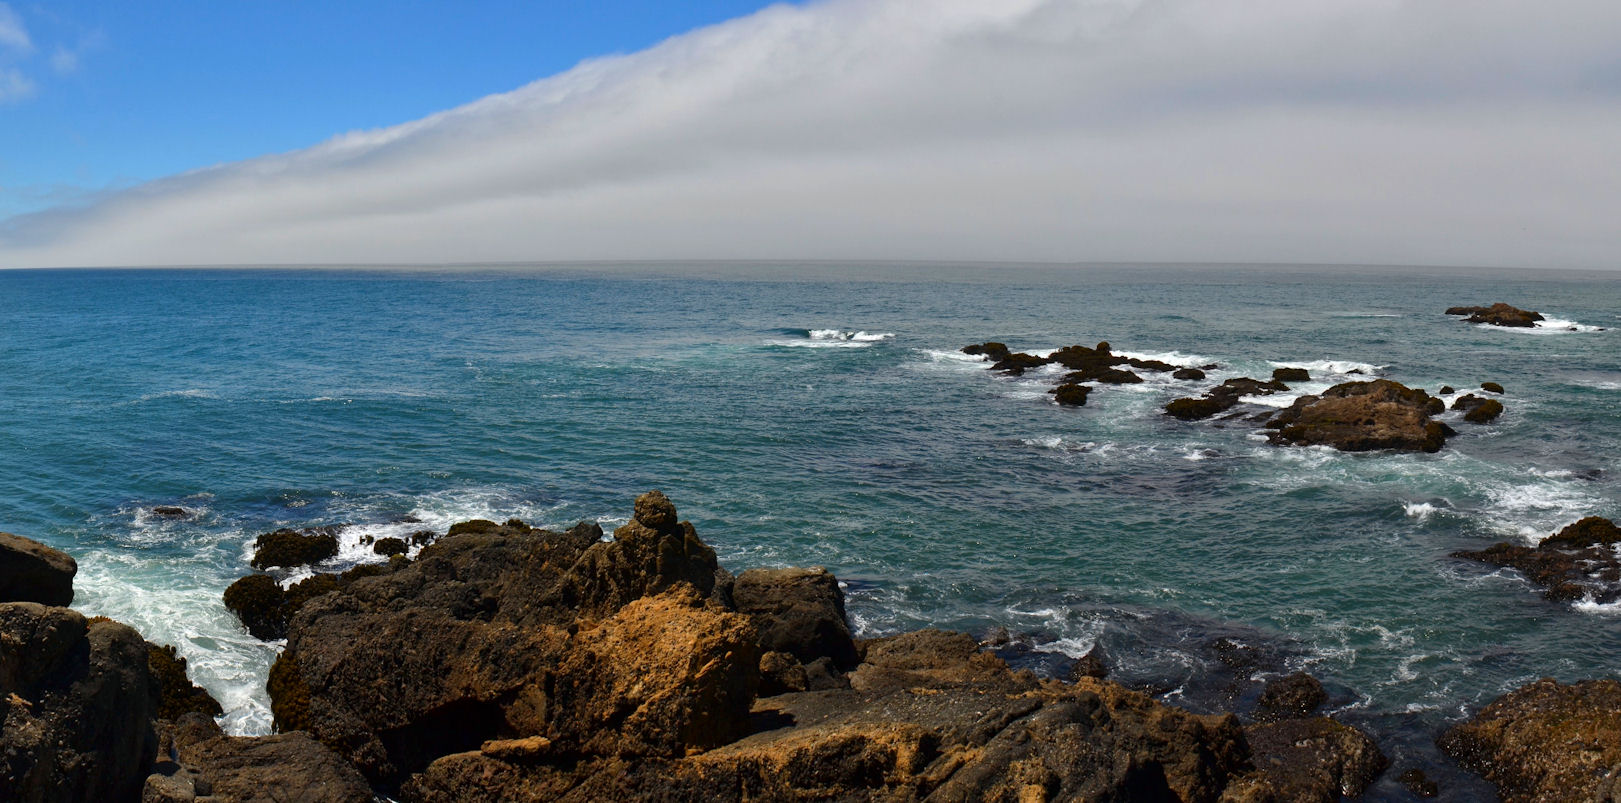 Ocean view from Pigeon Point on the Central California Coast